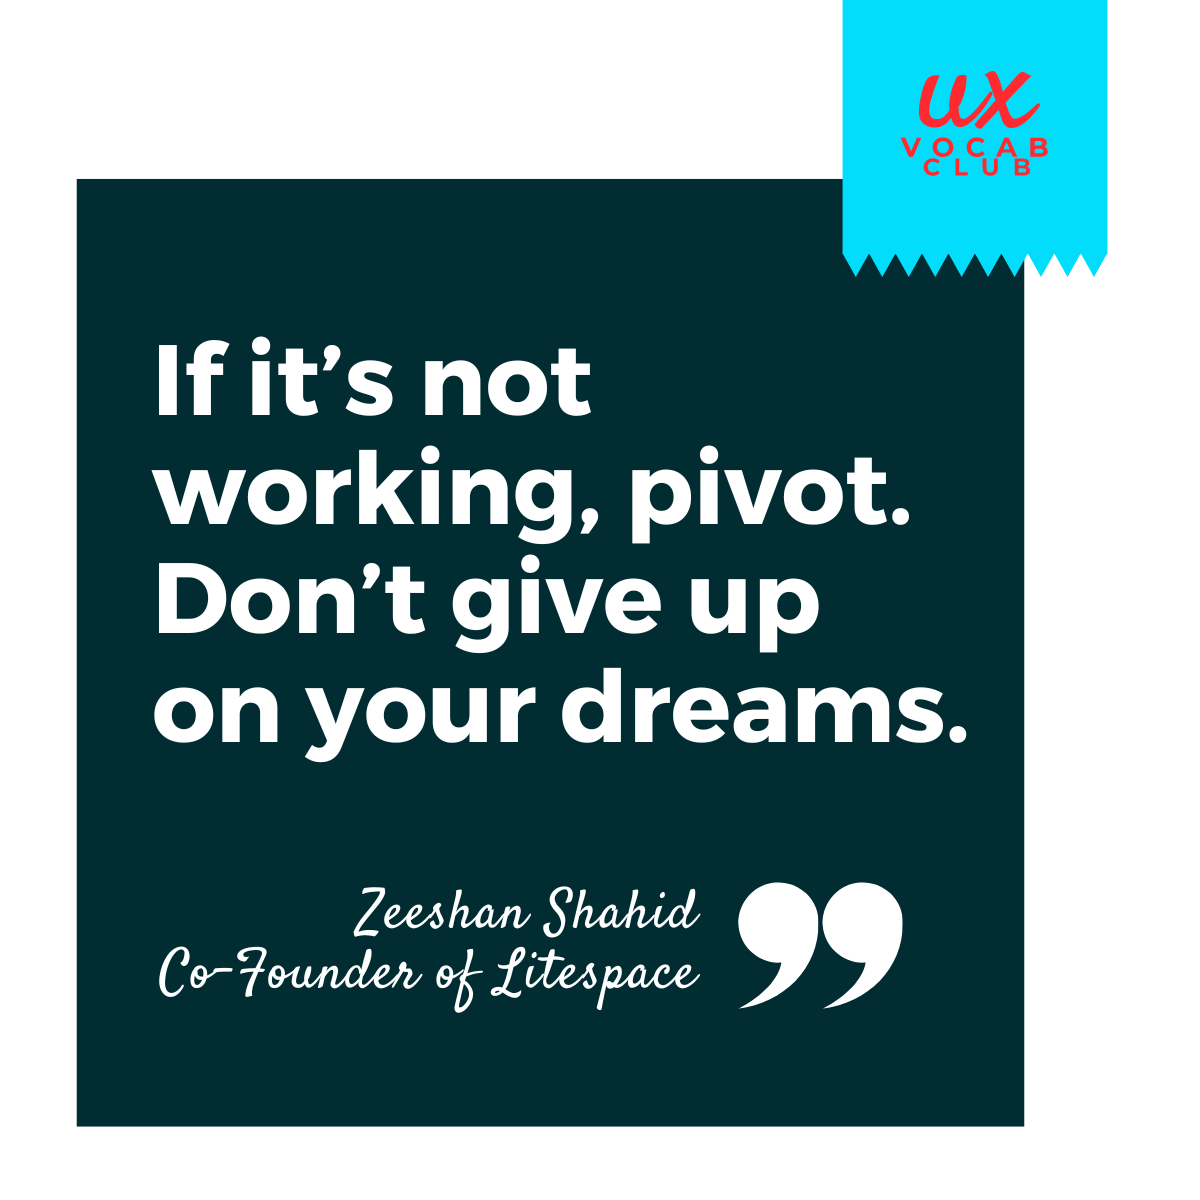 Quote from Zeeshan Shahid, Co-founder of Litespace